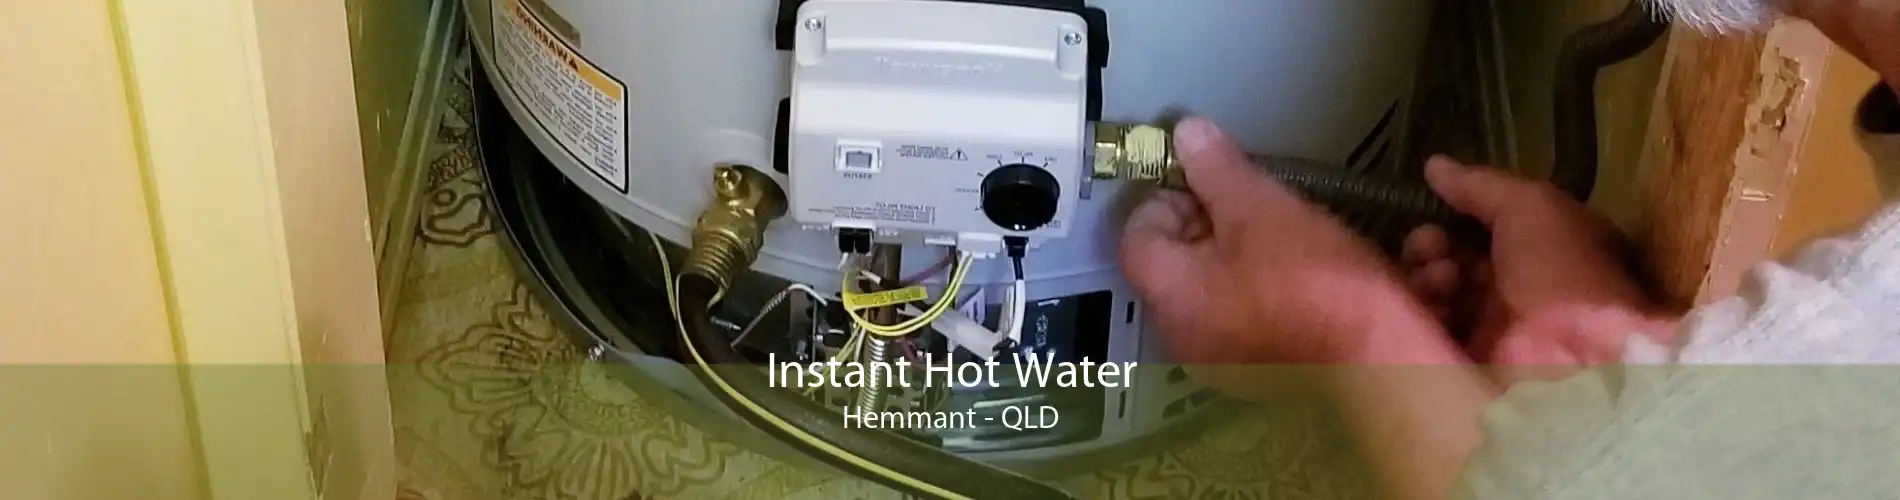 Instant Hot Water Hemmant - QLD